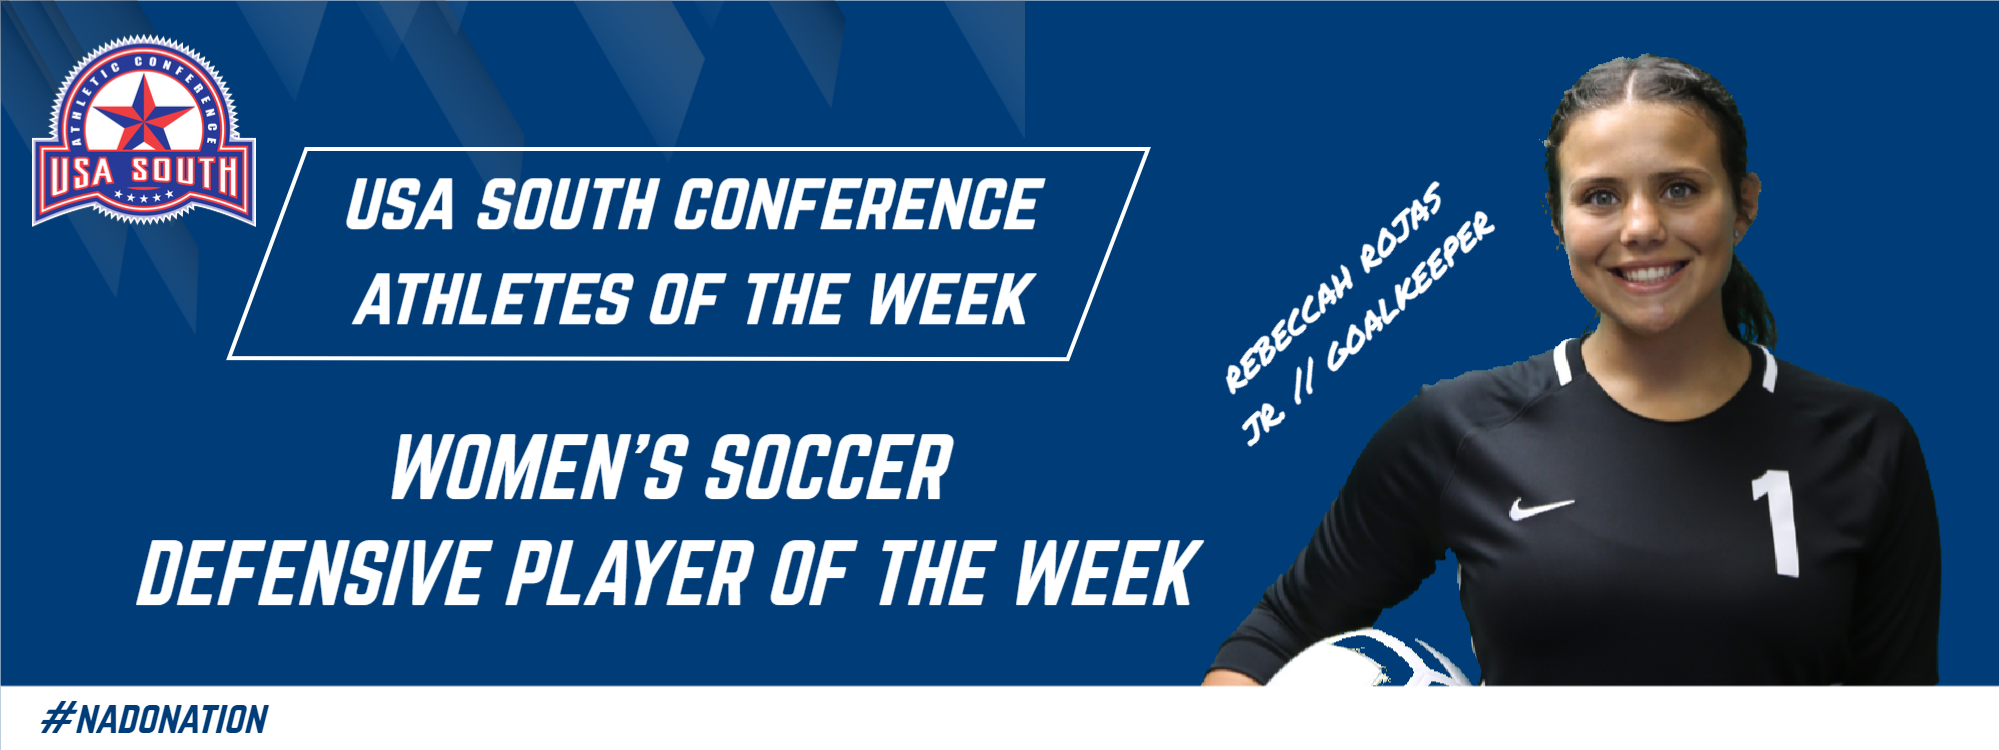 Rojas Named USA South Women’s Soccer Defensive Player of the Week